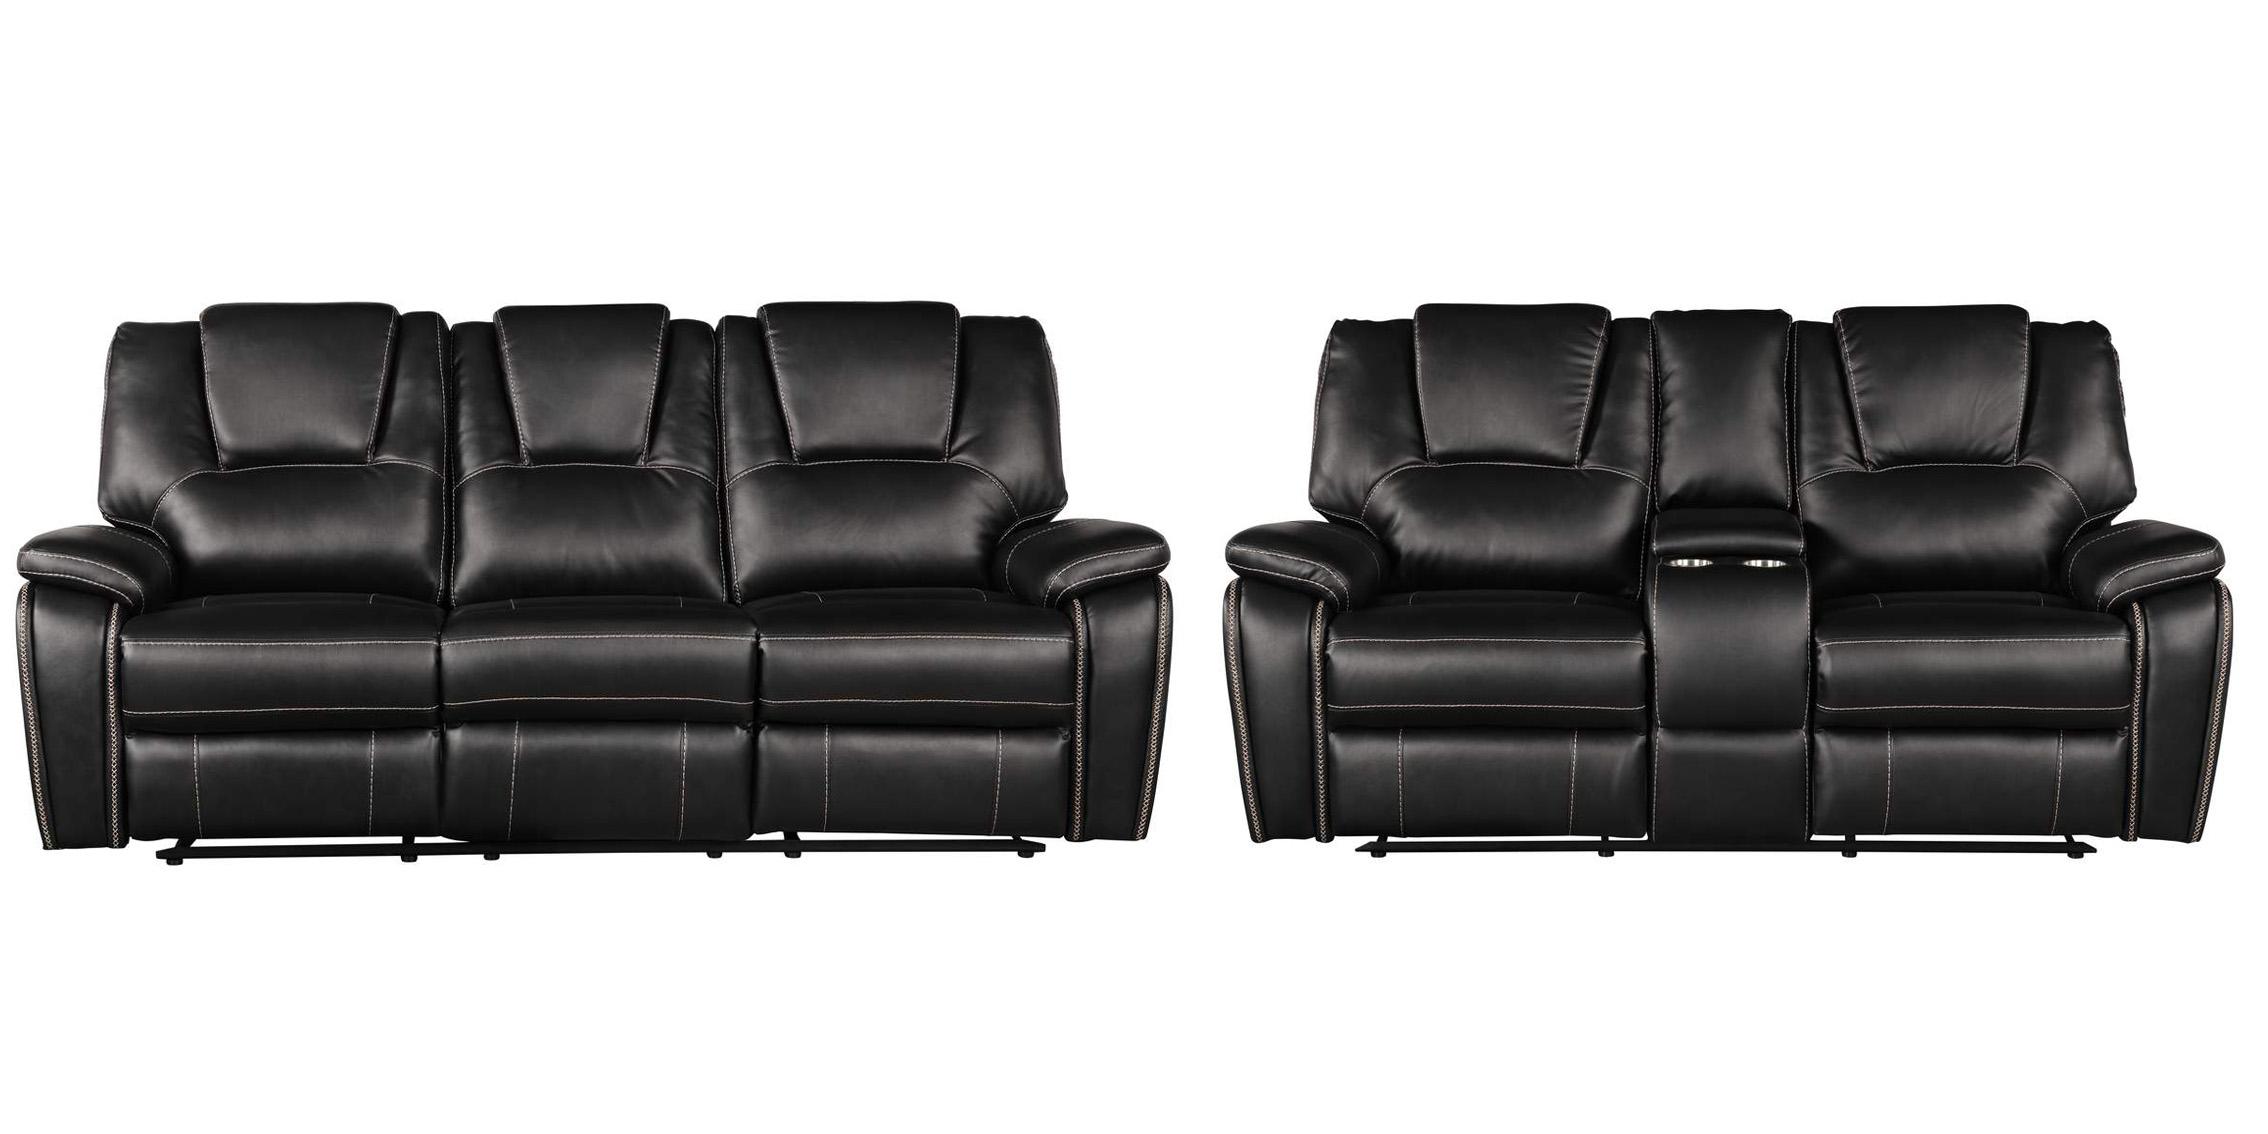 Contemporary, Modern Recliner Sofa Set Hongkong GHF-733569288922 in Black Eco-Leather